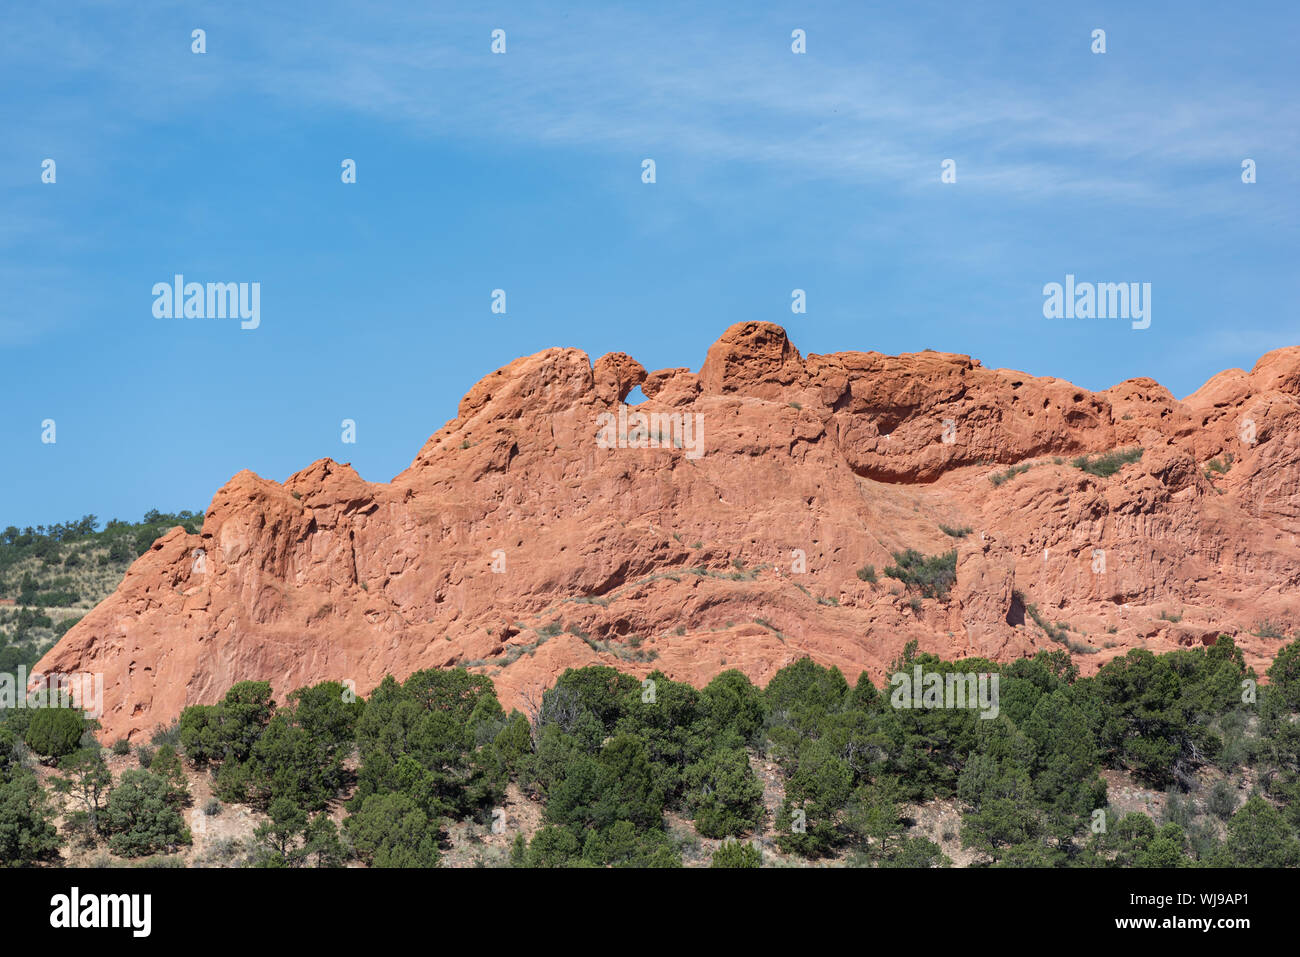 Kissing Camels At Garden Of The Gods Stock Photo 269425353 Alamy